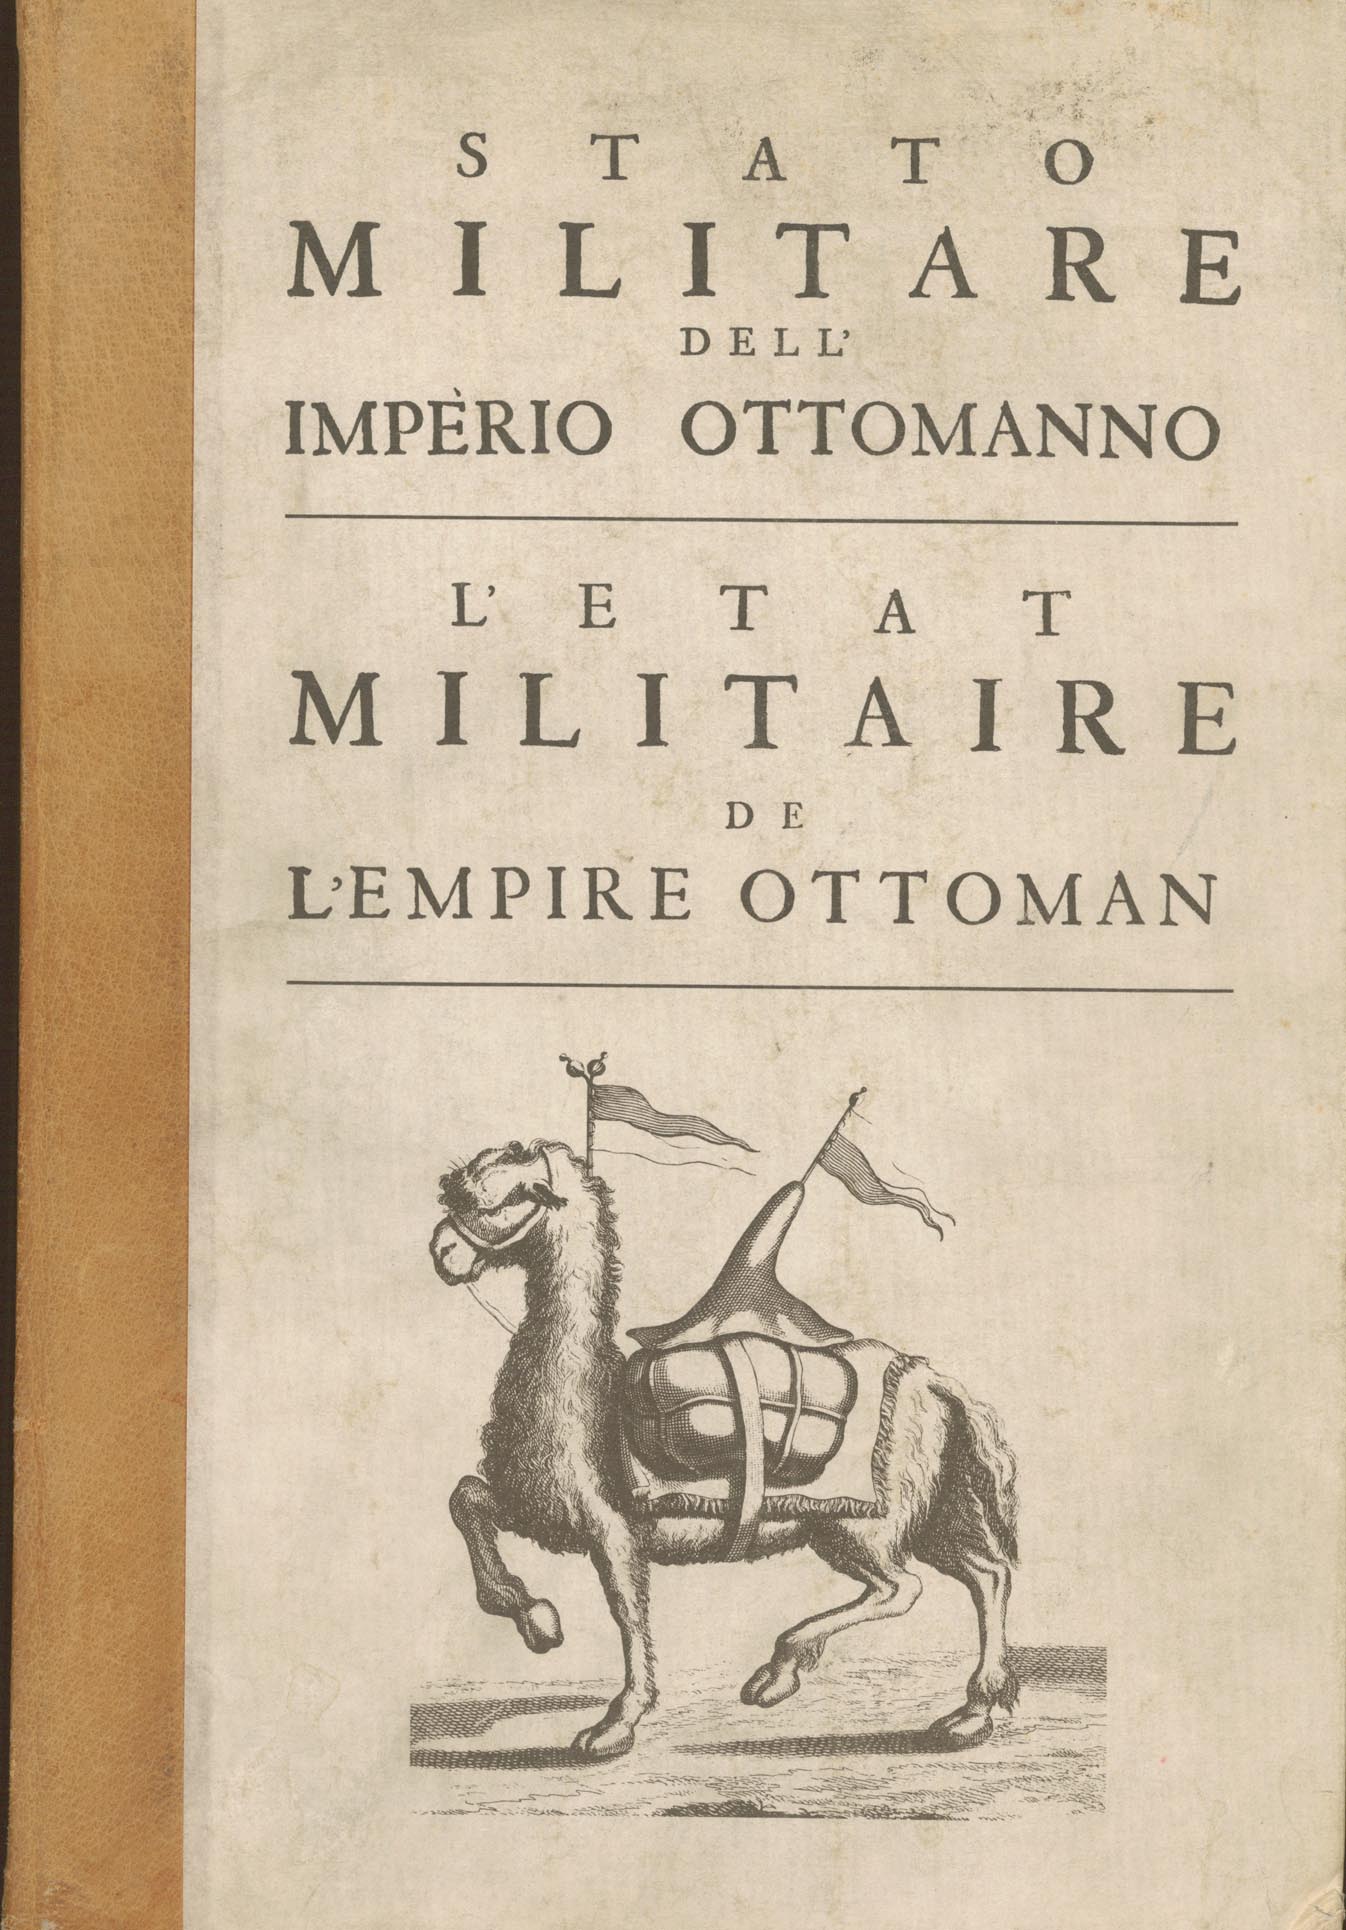 Military State of the Ottoman Empire by Marsili (1732) 